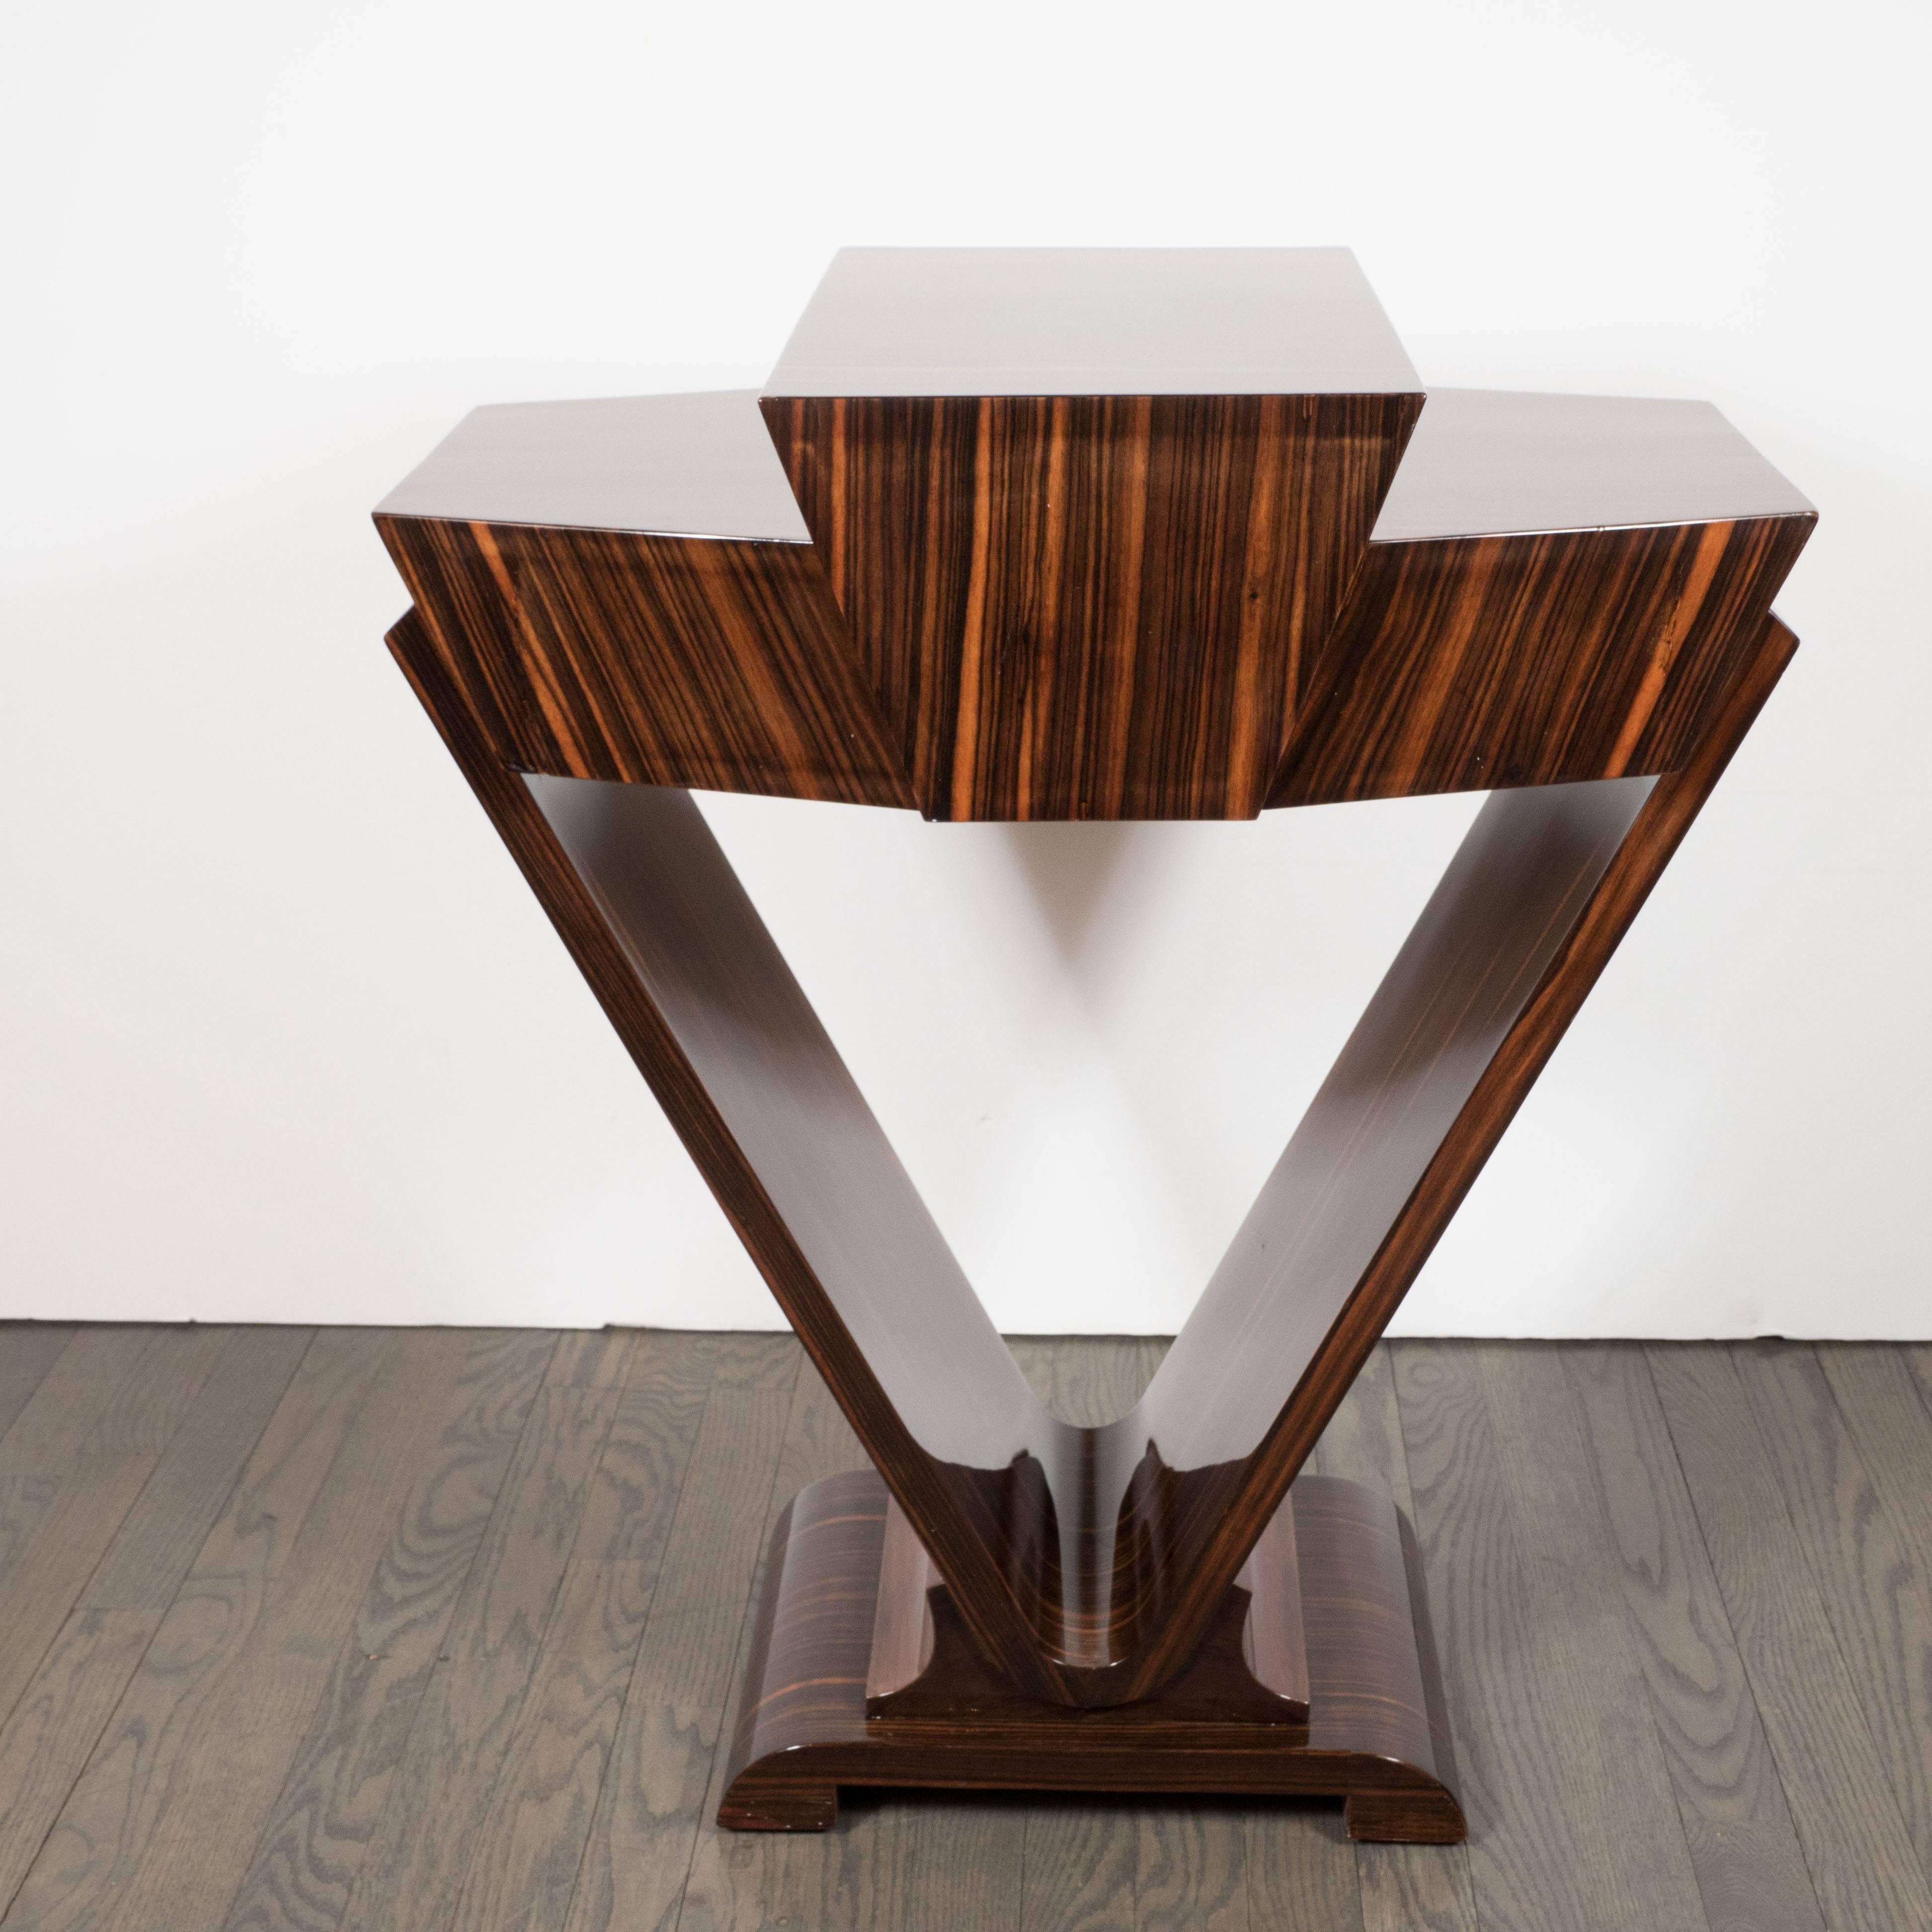 This console table features dramatically striped wood grain of exotic Macassar, consisting of sherry and coffee hues, which is complimented by the black lacquer pull to open a drawer for convenient storage The table boasts an ironically Art Deco